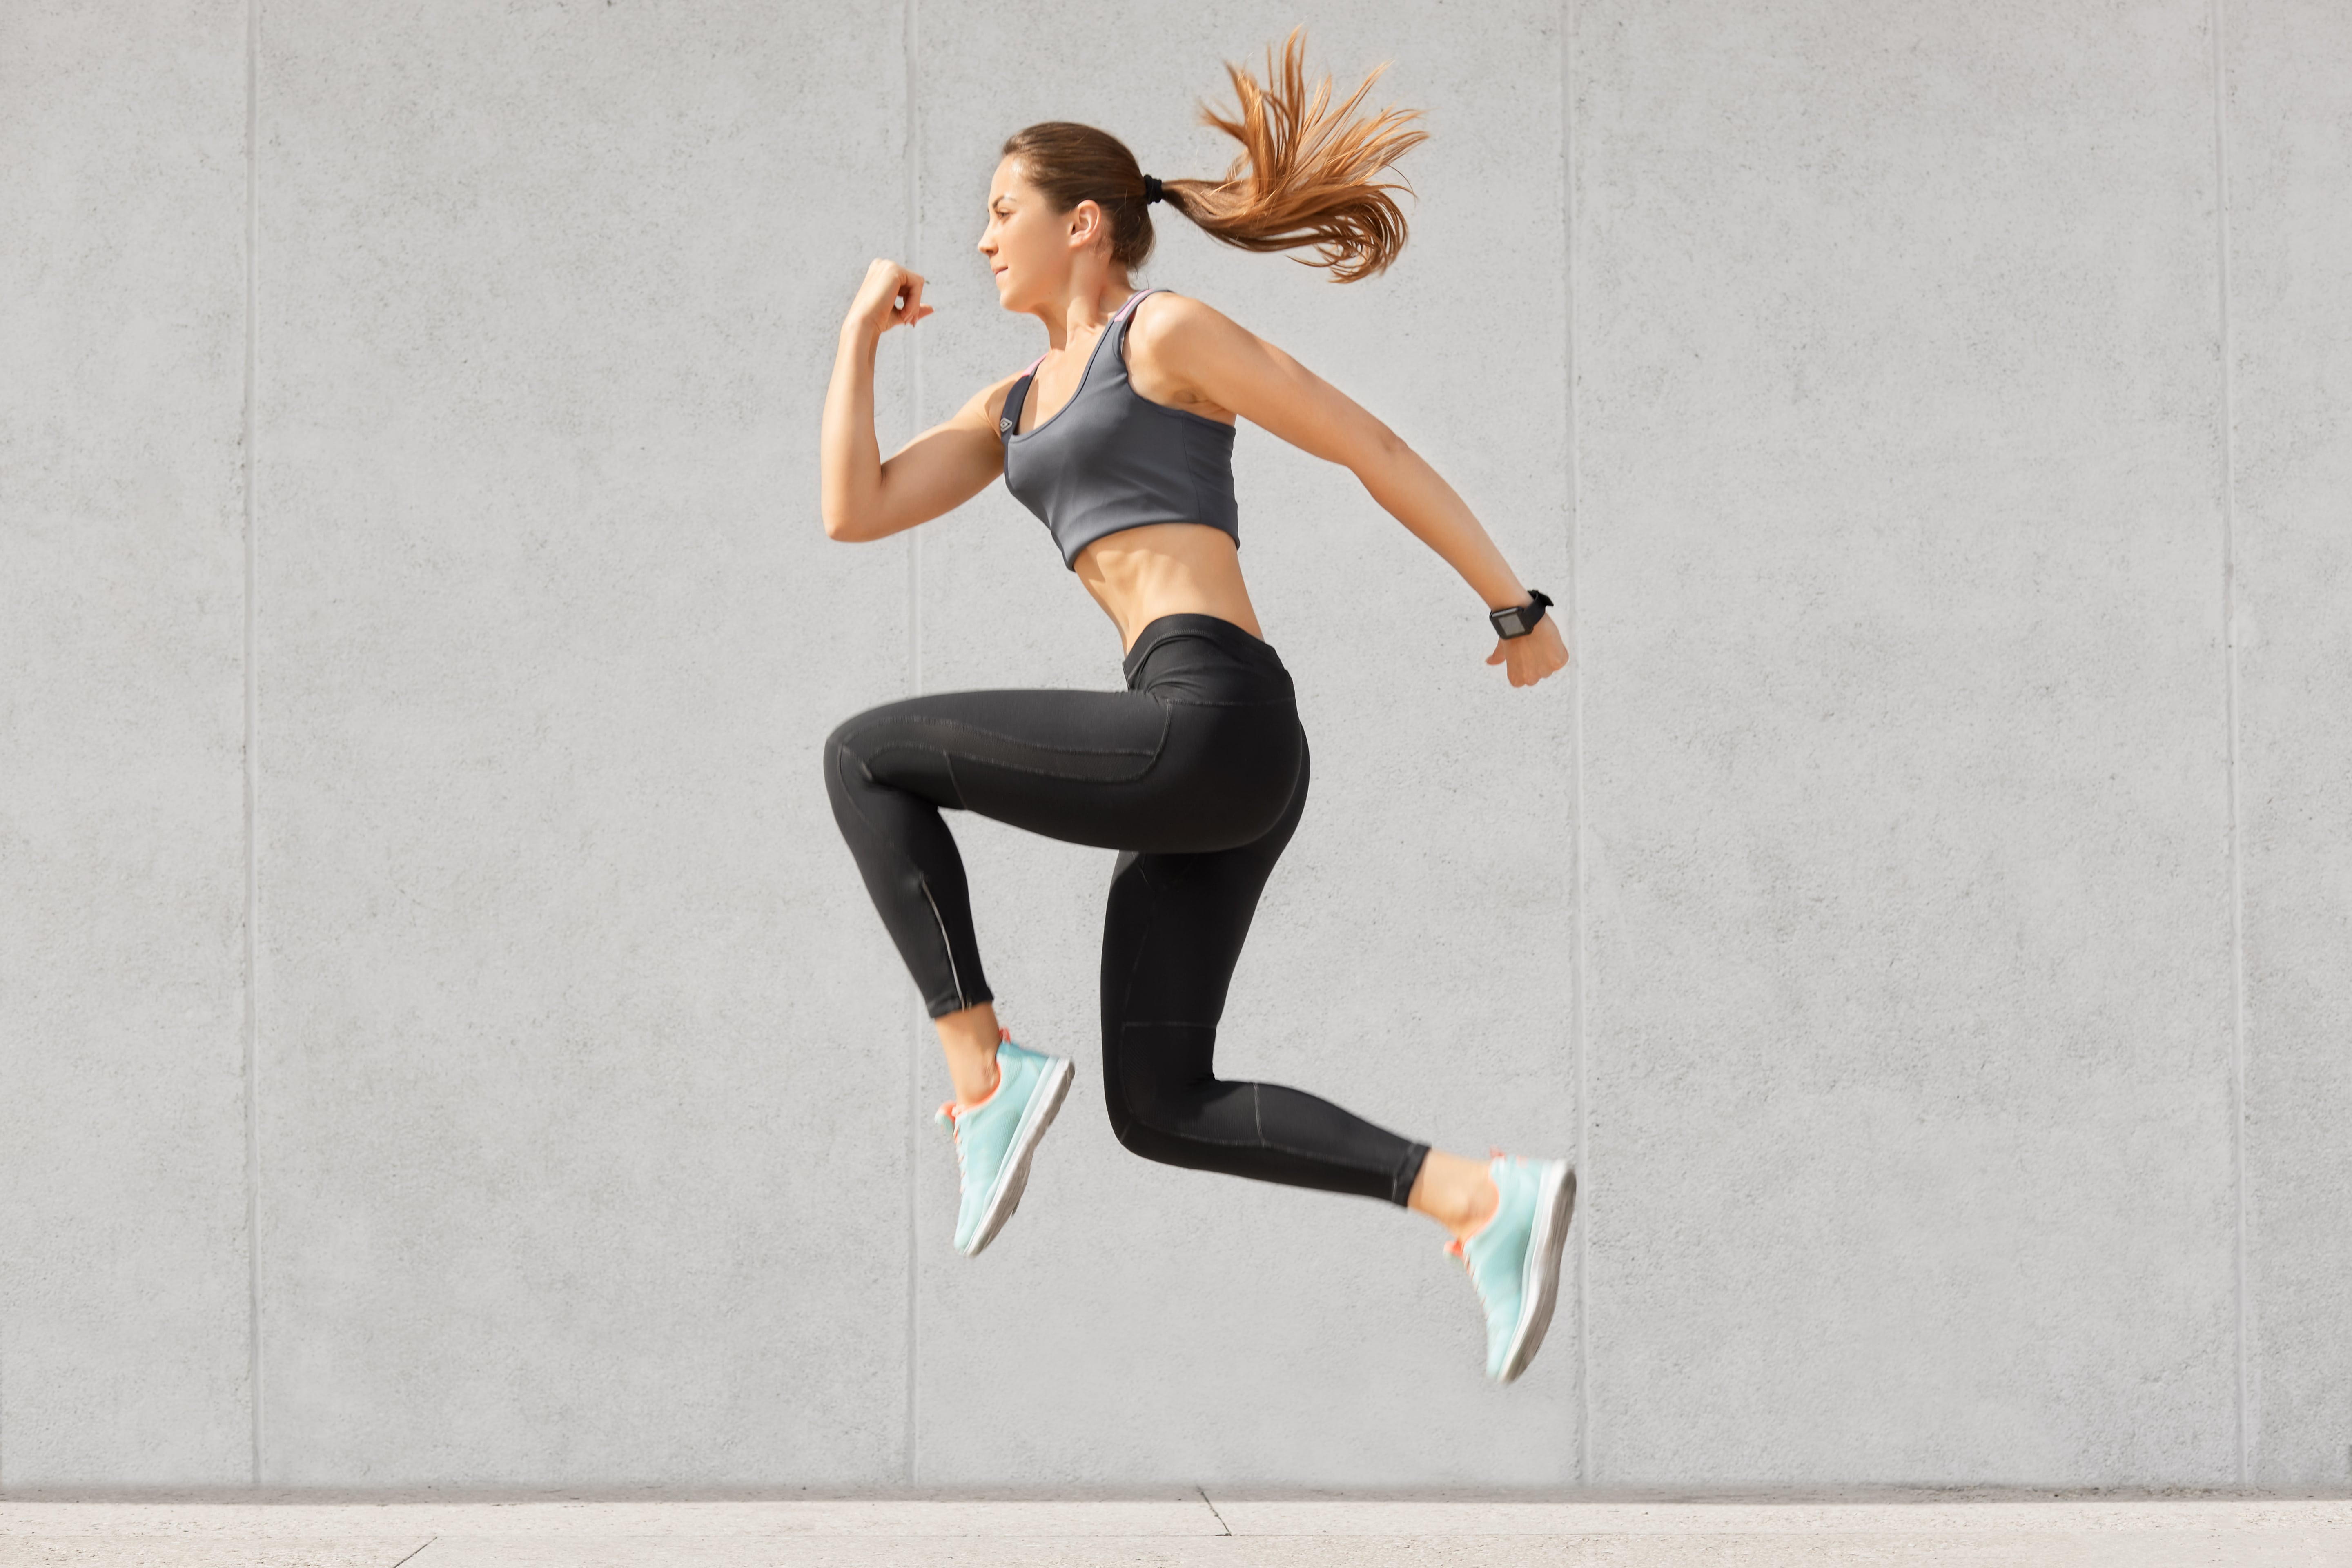 active-woman-being-full-of-energy-jumps-high-in-air-wears-sportsclothes-prepares-for-sport-competitions-min.jpg?1639075769151